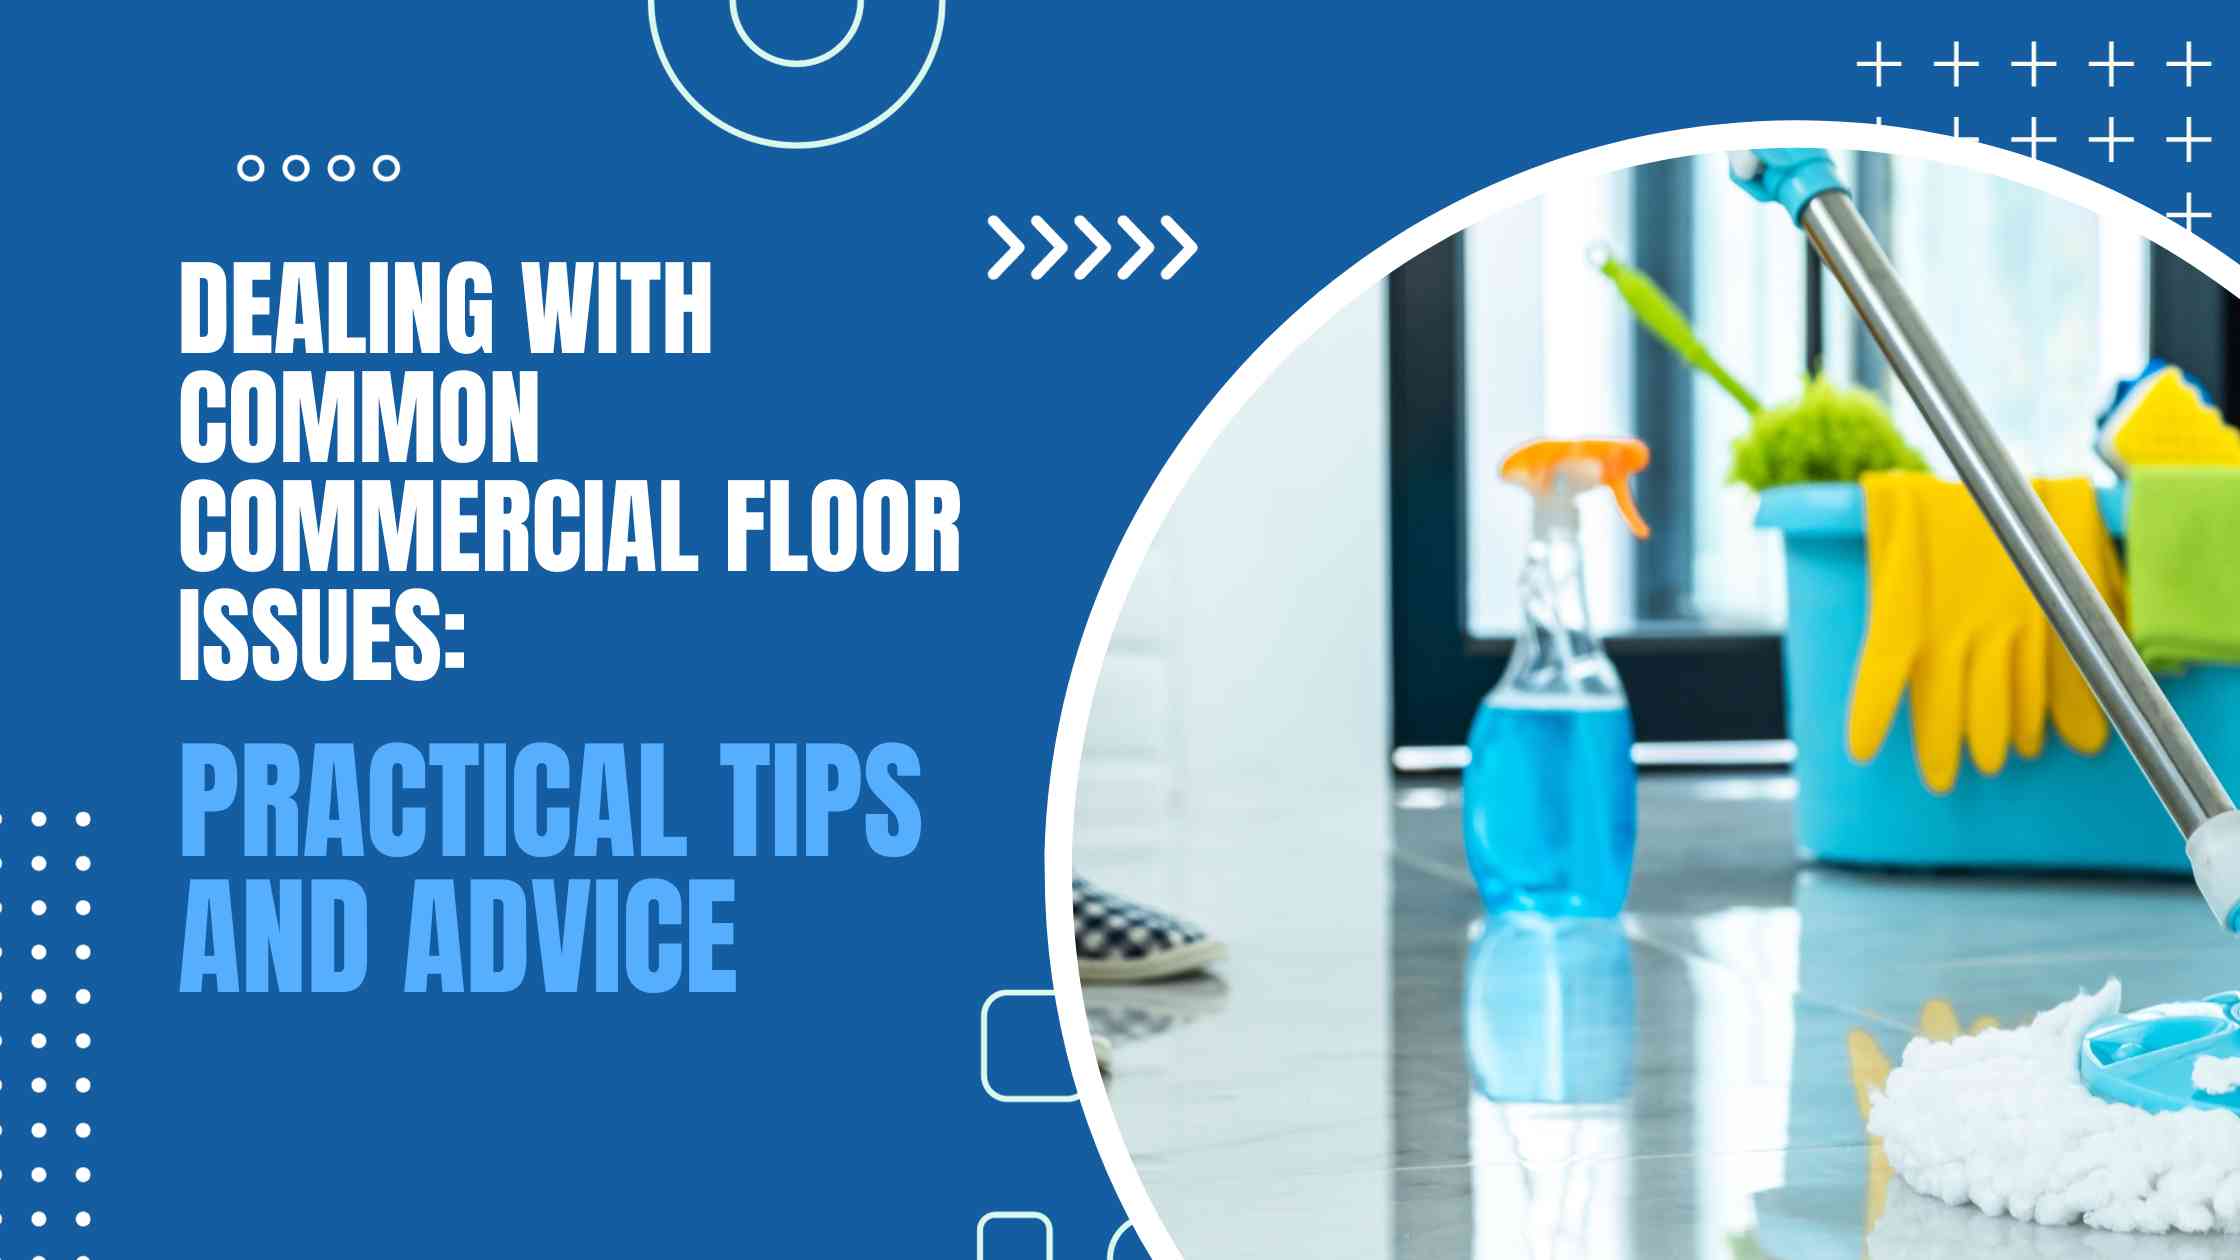 Dealing with common commercial floor issues